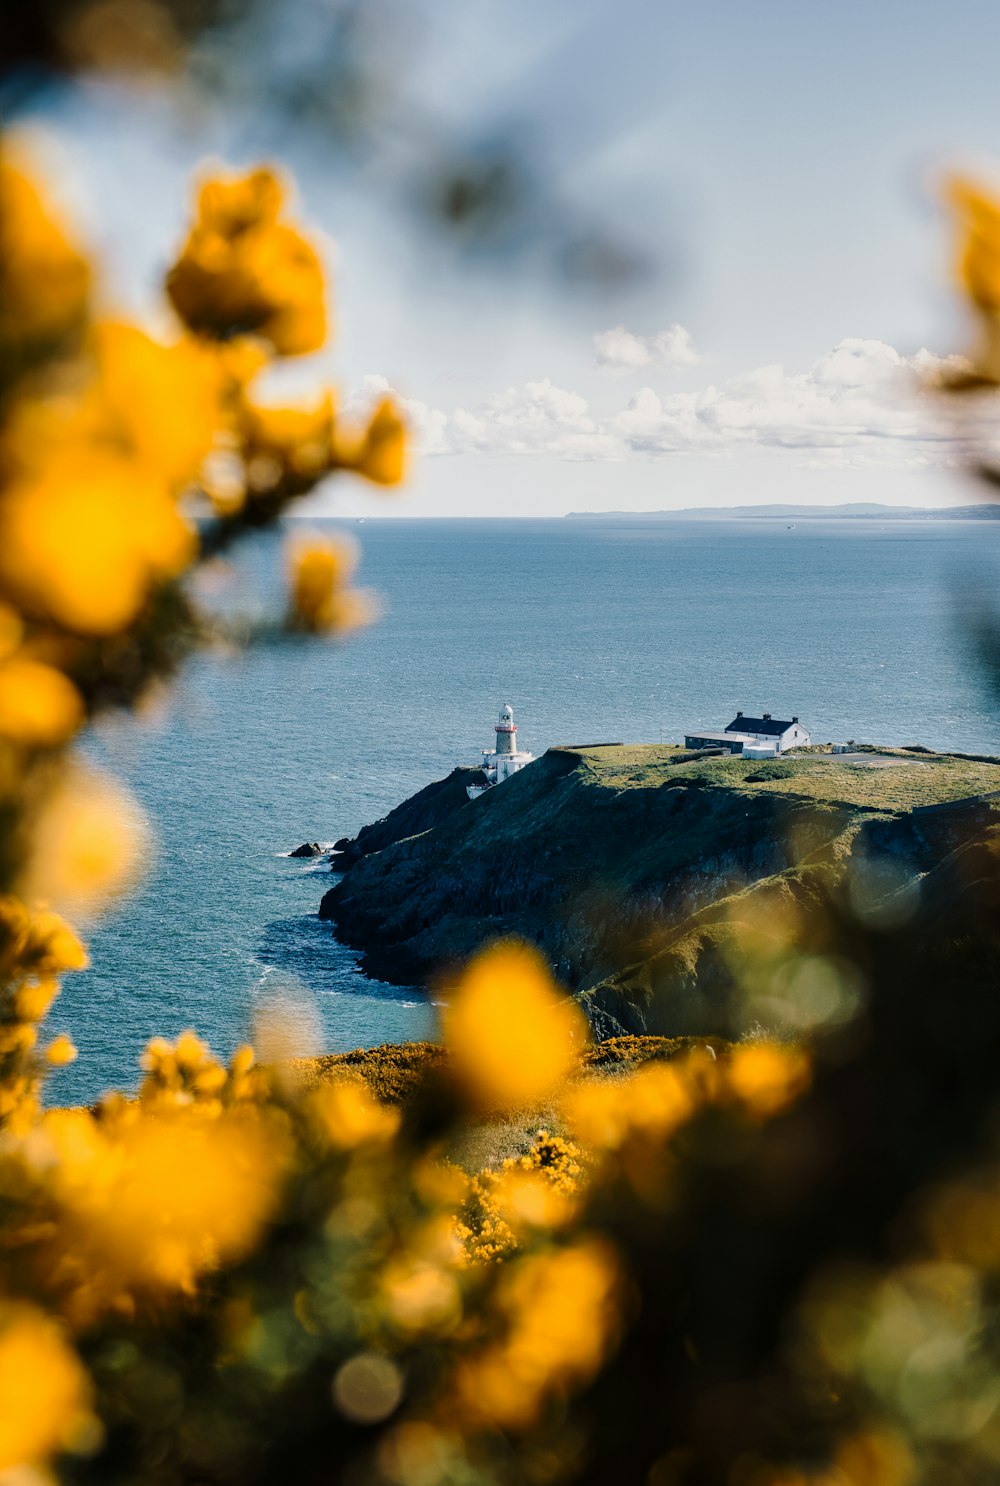 a lighthouse on a small island with yellow flowers in the foreground